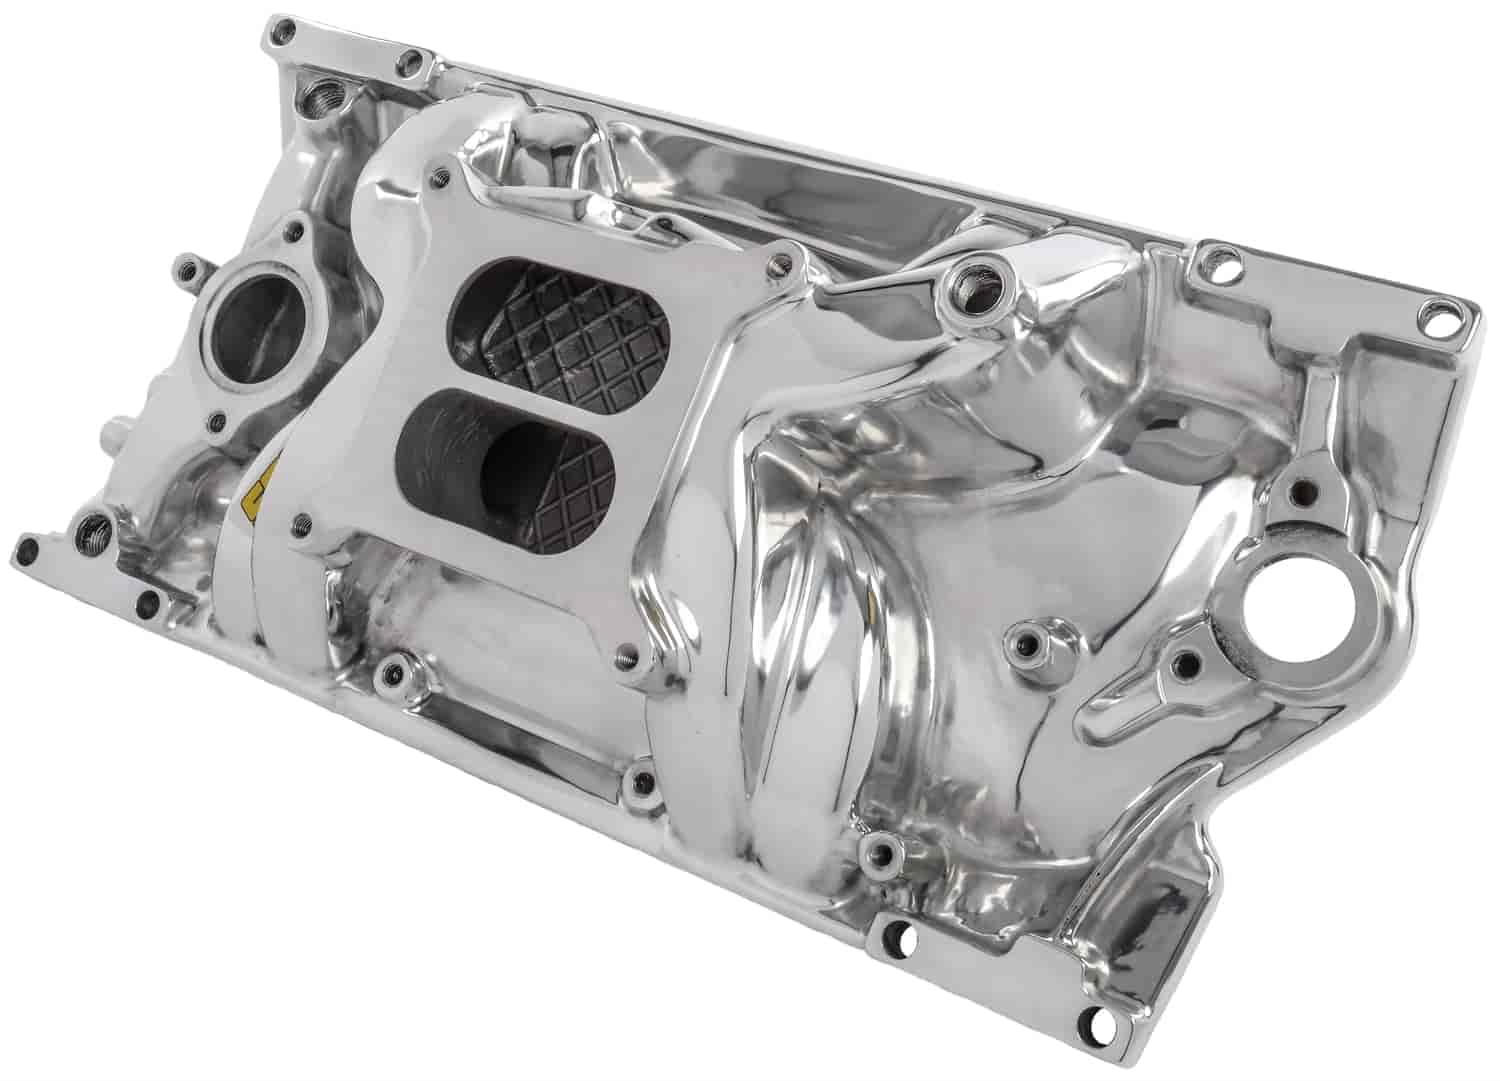 JEGS Performance Products 513016: Intake Manifold for Small Block Chevy  with 1996-2002 Vortec L31 Cast Iron Heads [Polished] - JEGS